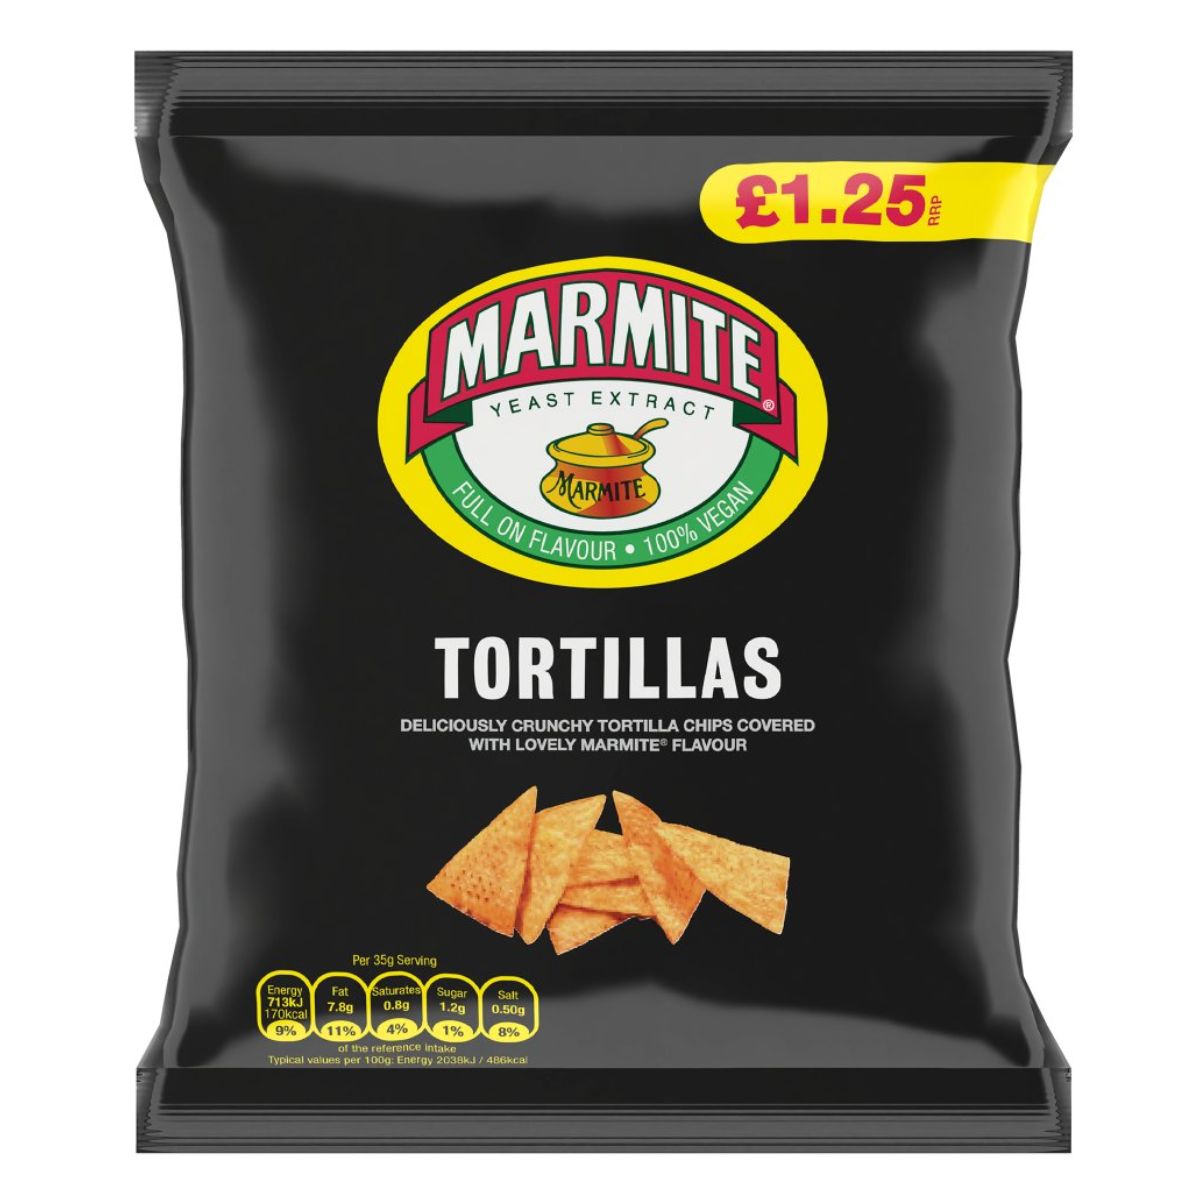 A bag of Marmite - Tortillas - 70g, priced at £1.25, with text stating "deliciously crunchy tortilla chips covered with lovely marmite flavour.